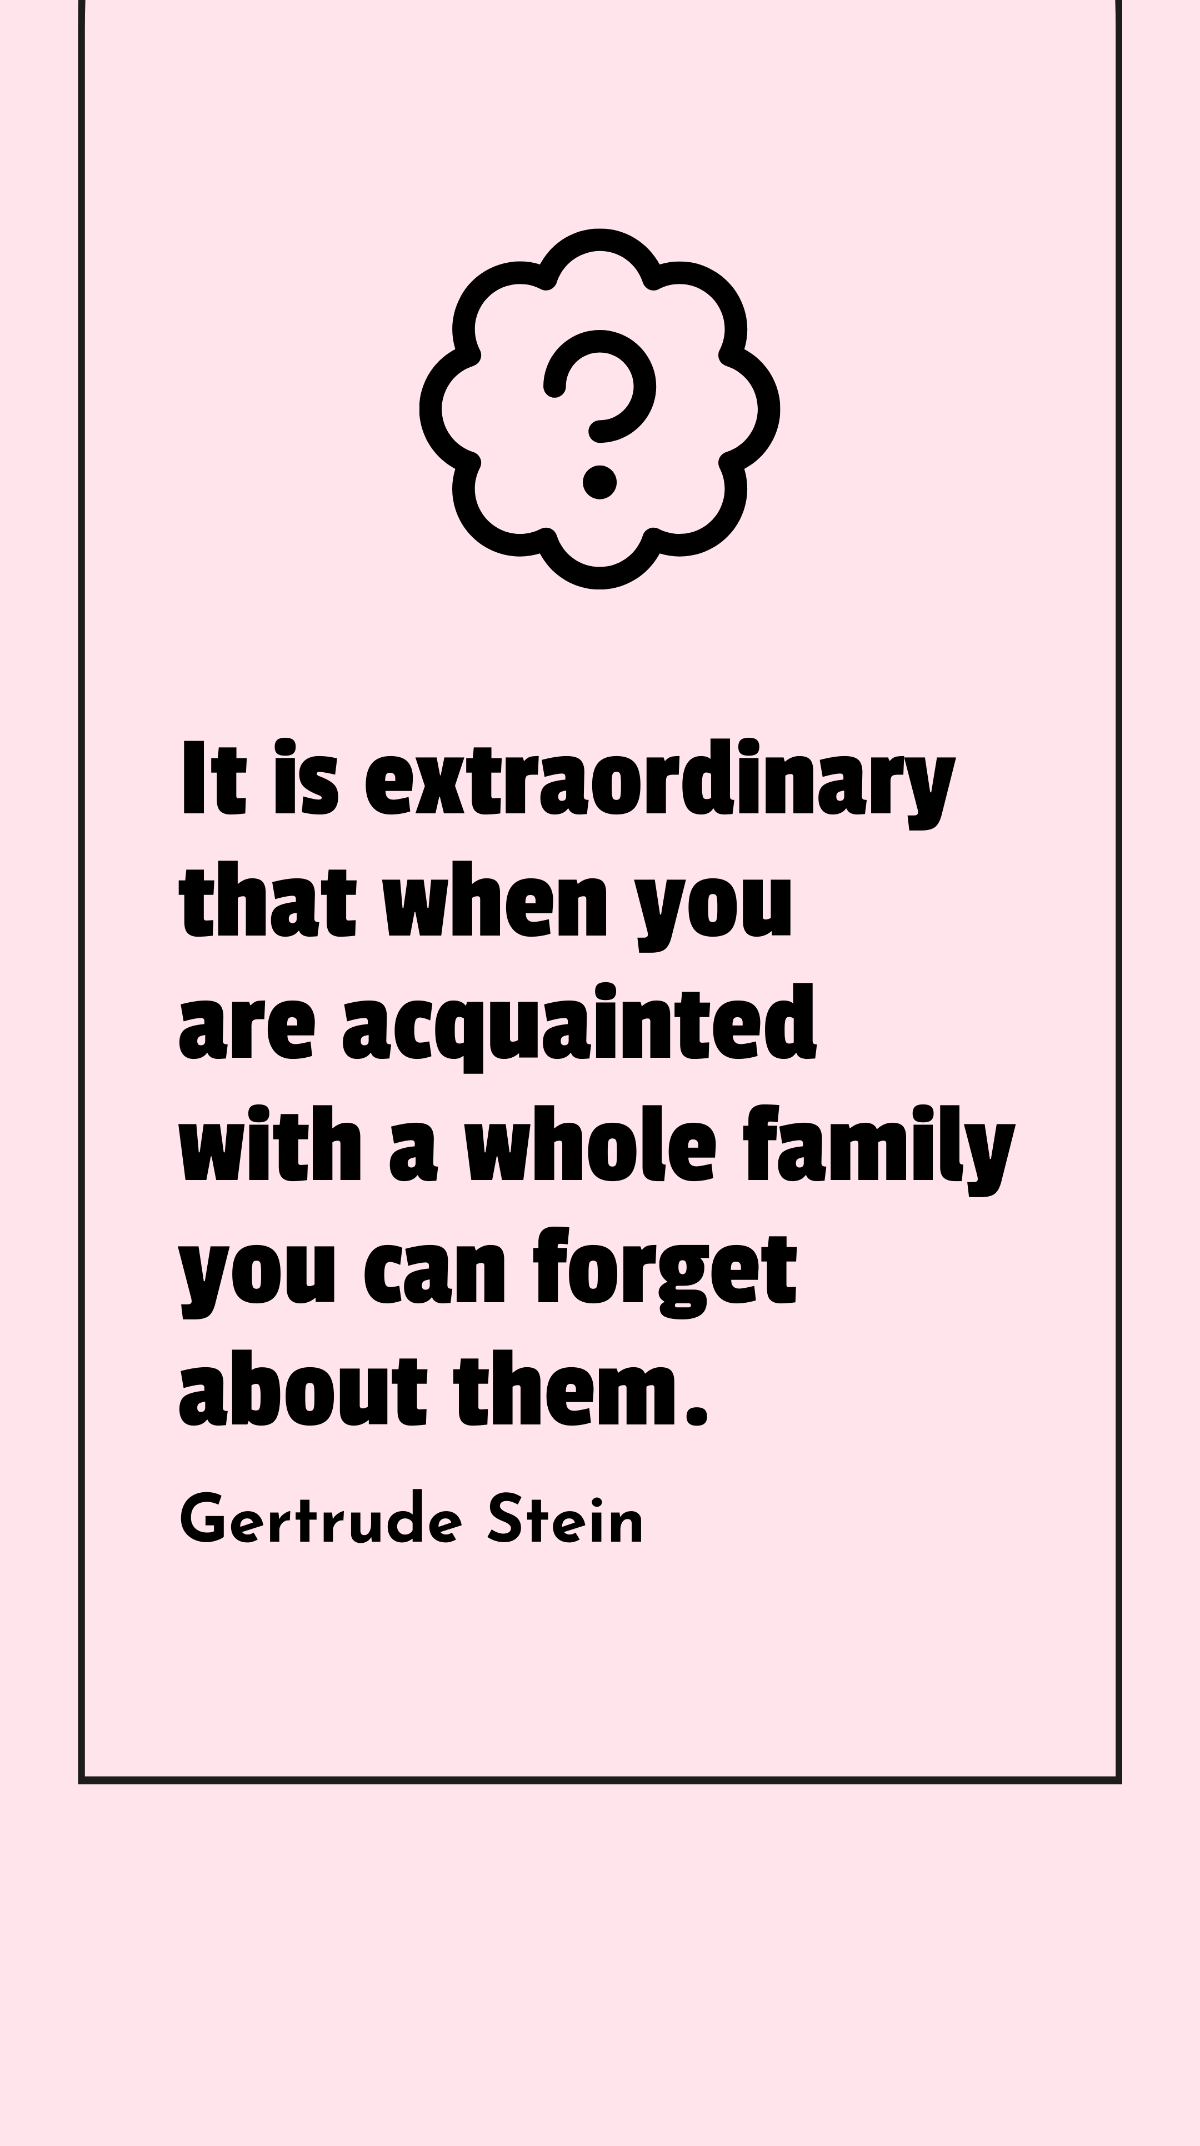 Gertrude Stein - It is extraordinary that when you are acquainted with a whole family you can forget about them.